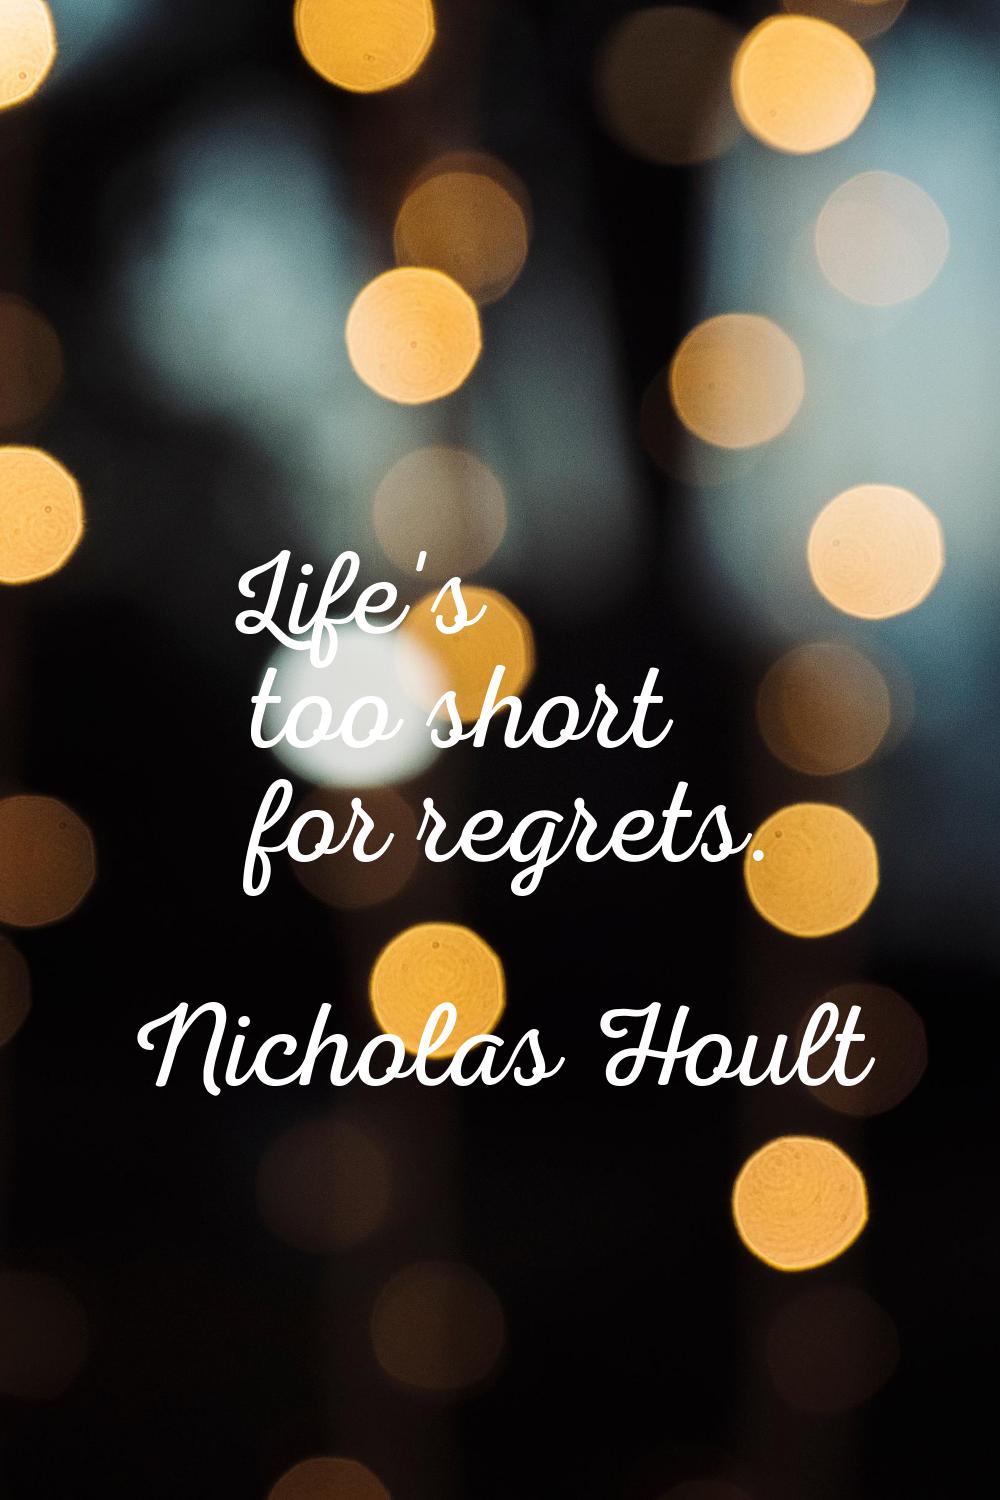 Life's too short for regrets.